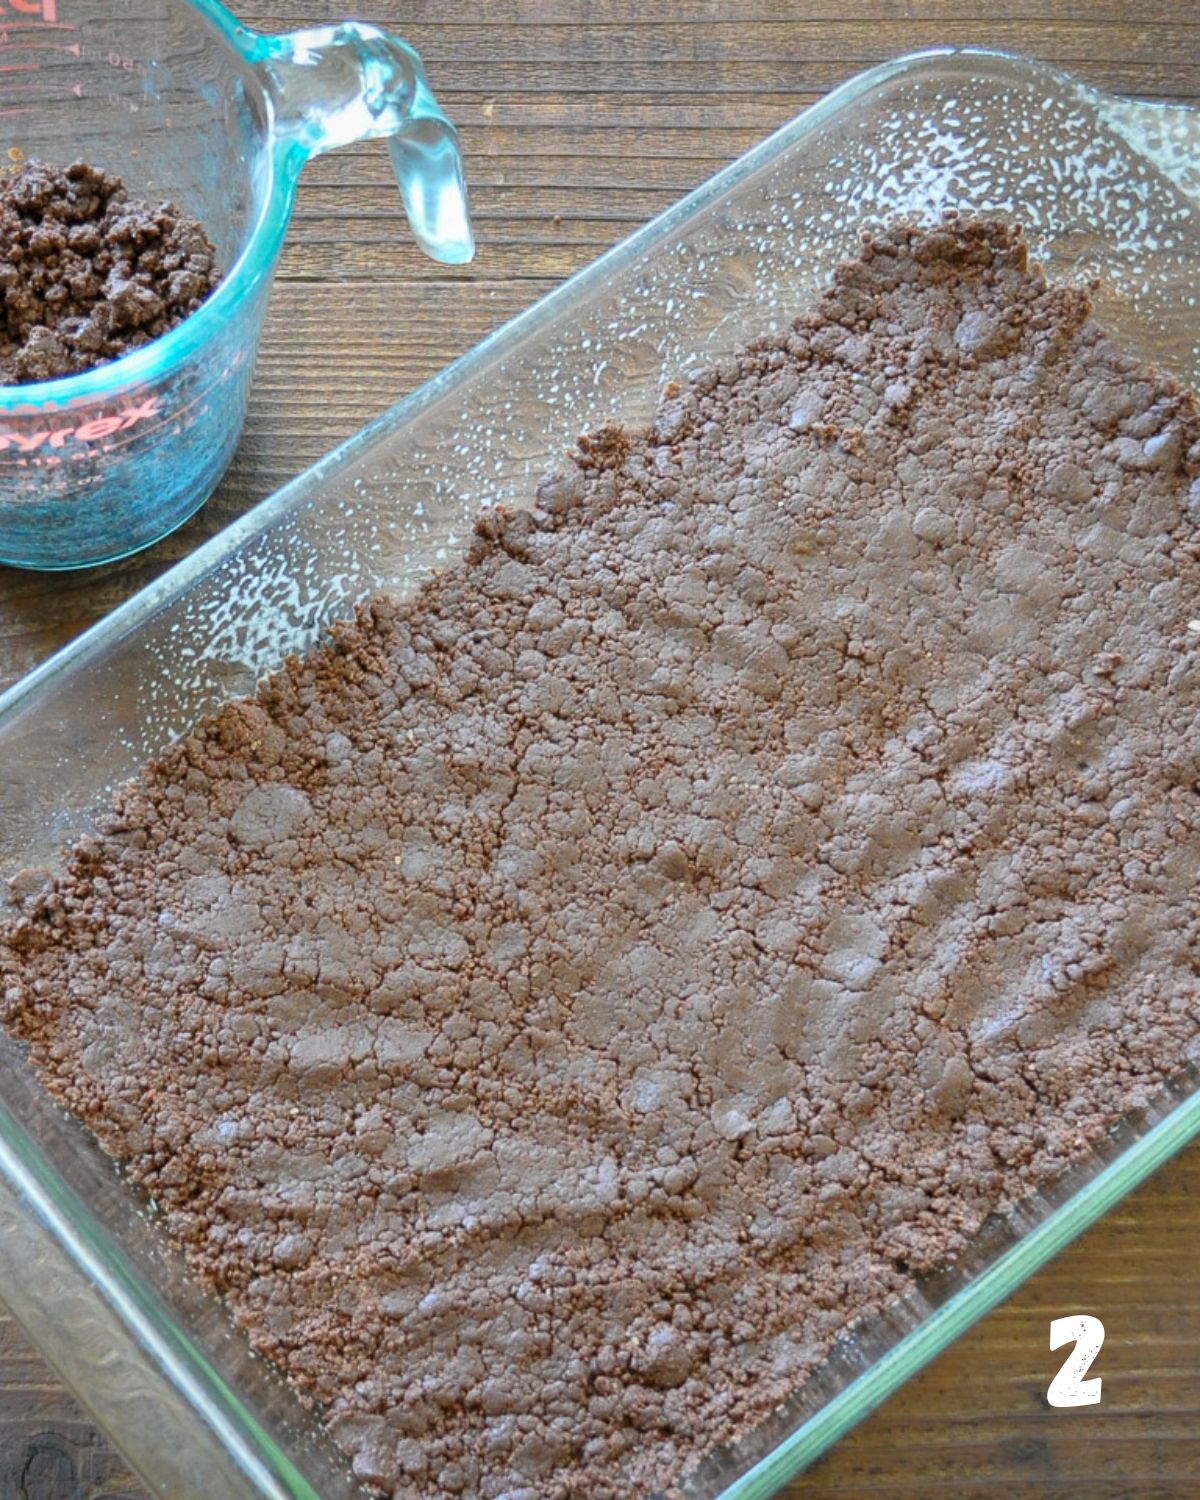 Chocolate cookie base pressed into baking dish.